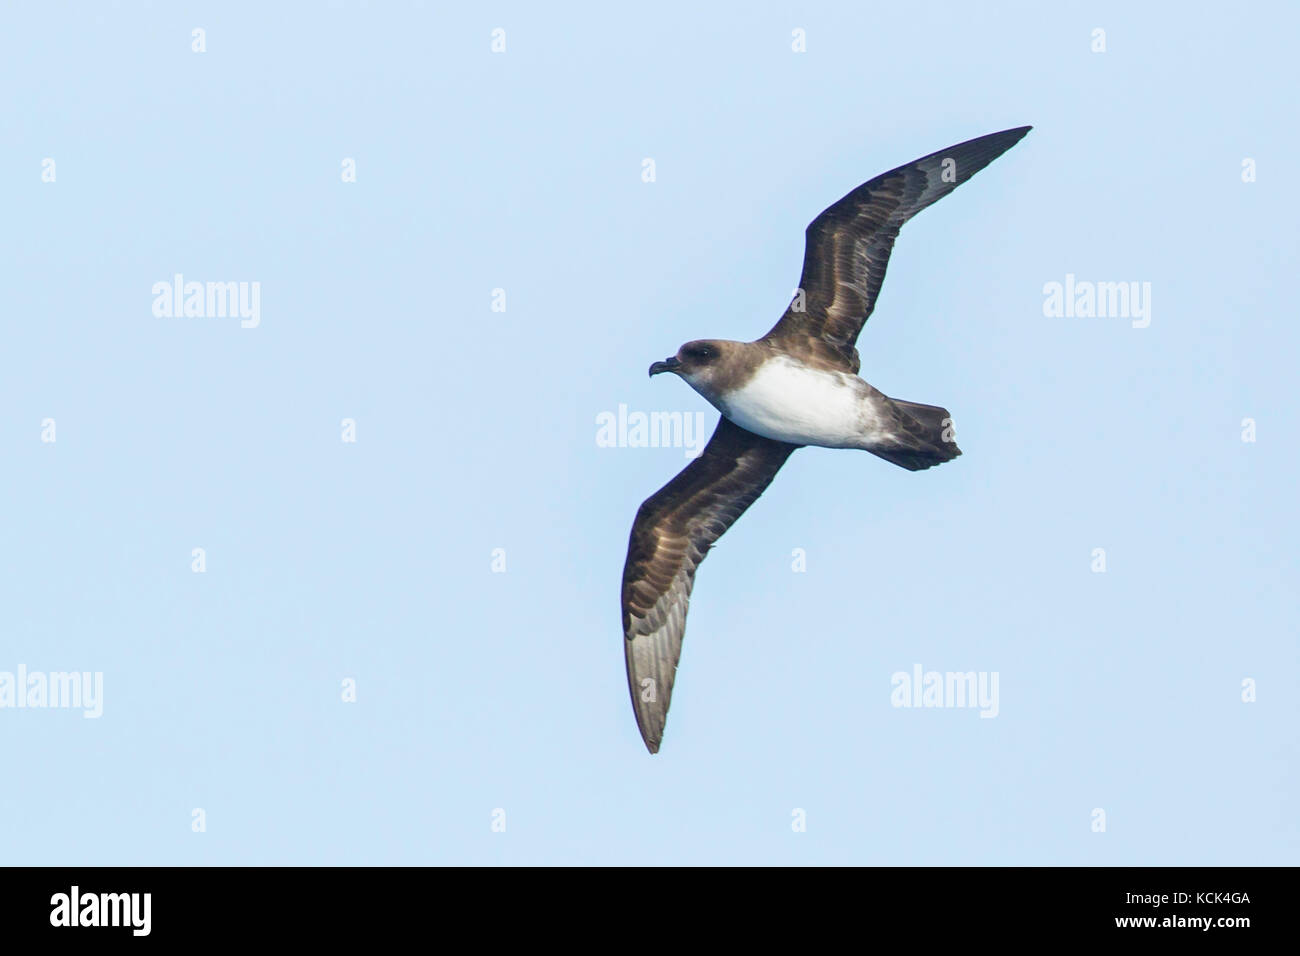 Atlantic Petrel (Pterodroma incerta) flying over the ocean searching for food near South Georgia Island. Stock Photo